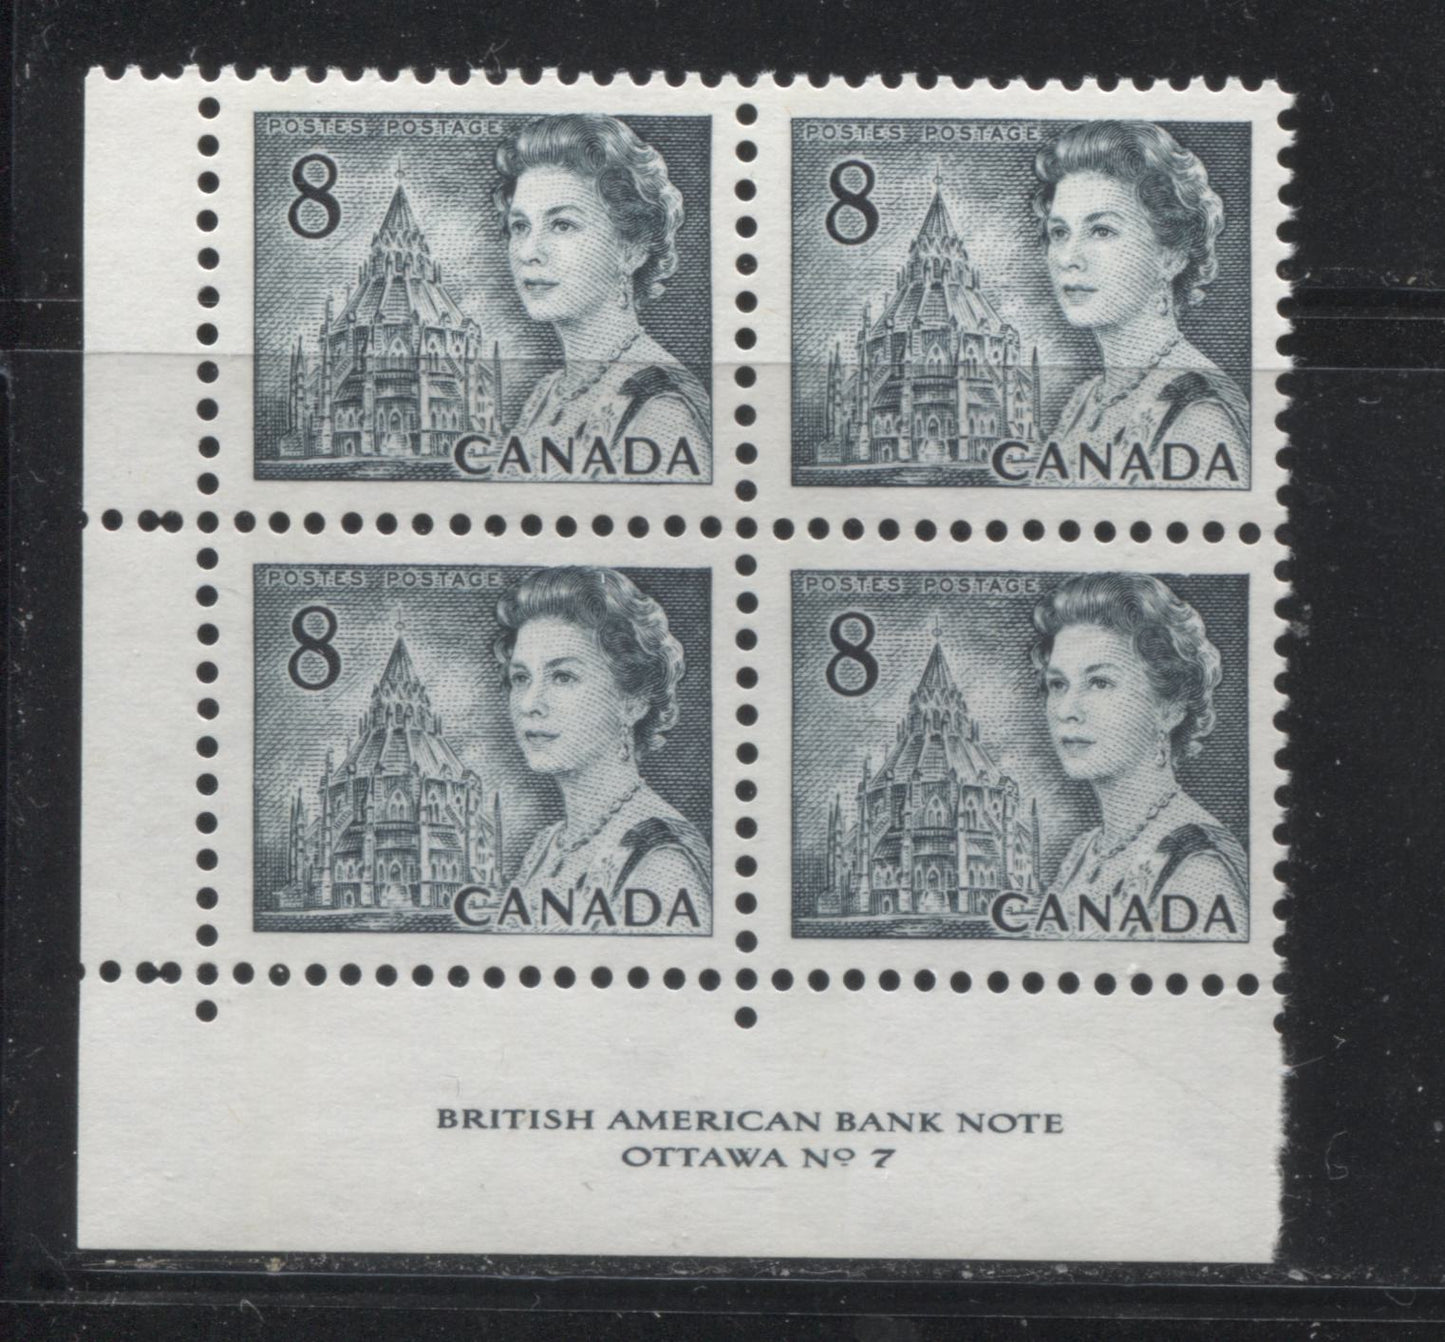 Lot 187 Canada #544piv 8c Slate Queen Elizabeth II, 1967-1973 Centennial Issue, An Unlisted VFNH LL T3 GT2 Tagged Plate 7 Block Of 4 On HF-fl Smooth Paper With PVA Gum, G2aC Tagging Error